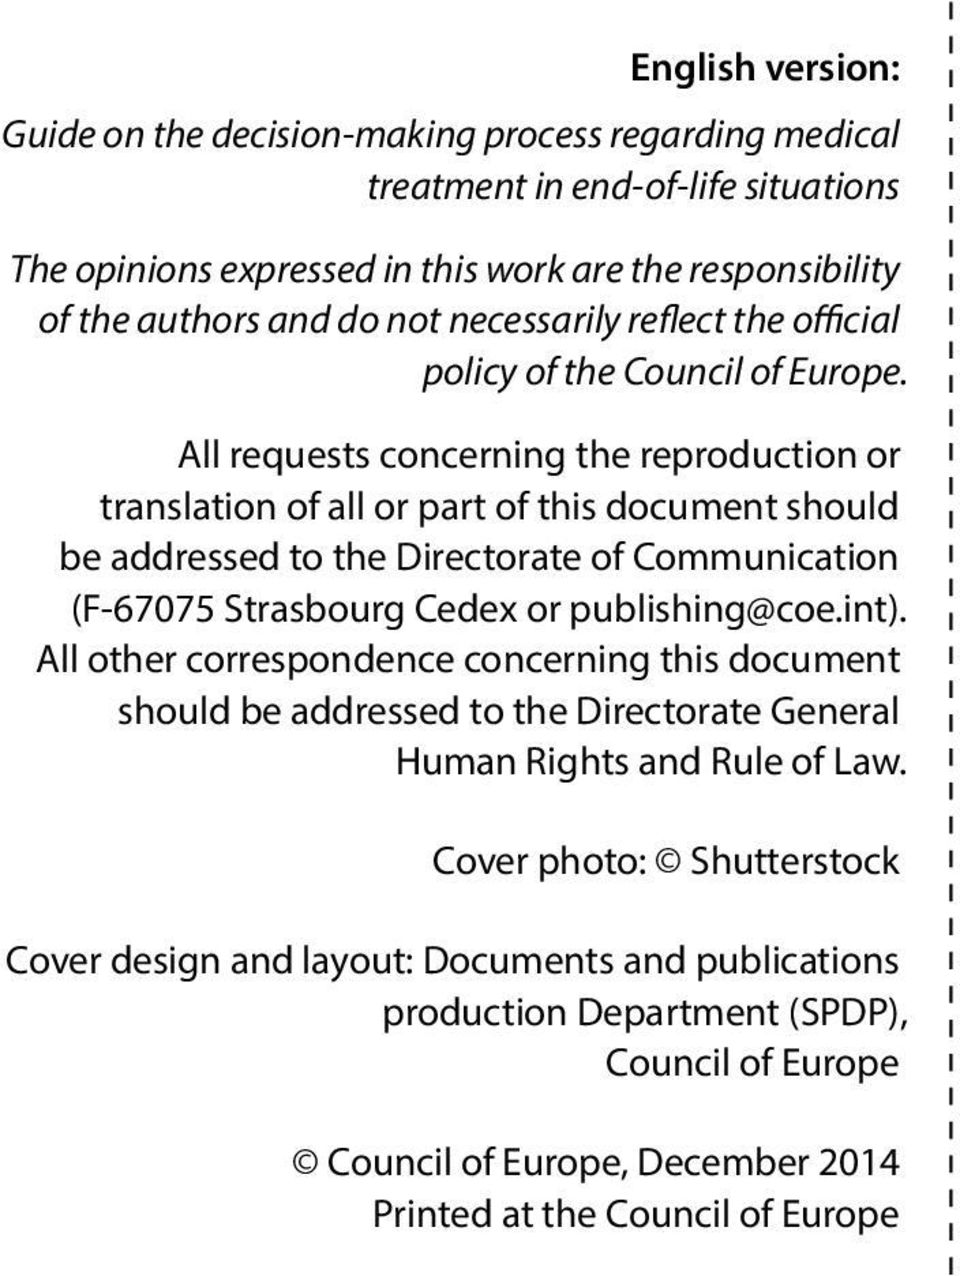 All requests concerning the reproduction or translation of all or part of this document should be addressed to the Directorate of Communication (F 67075 Strasbourg Cedex or publishing@coe.int).